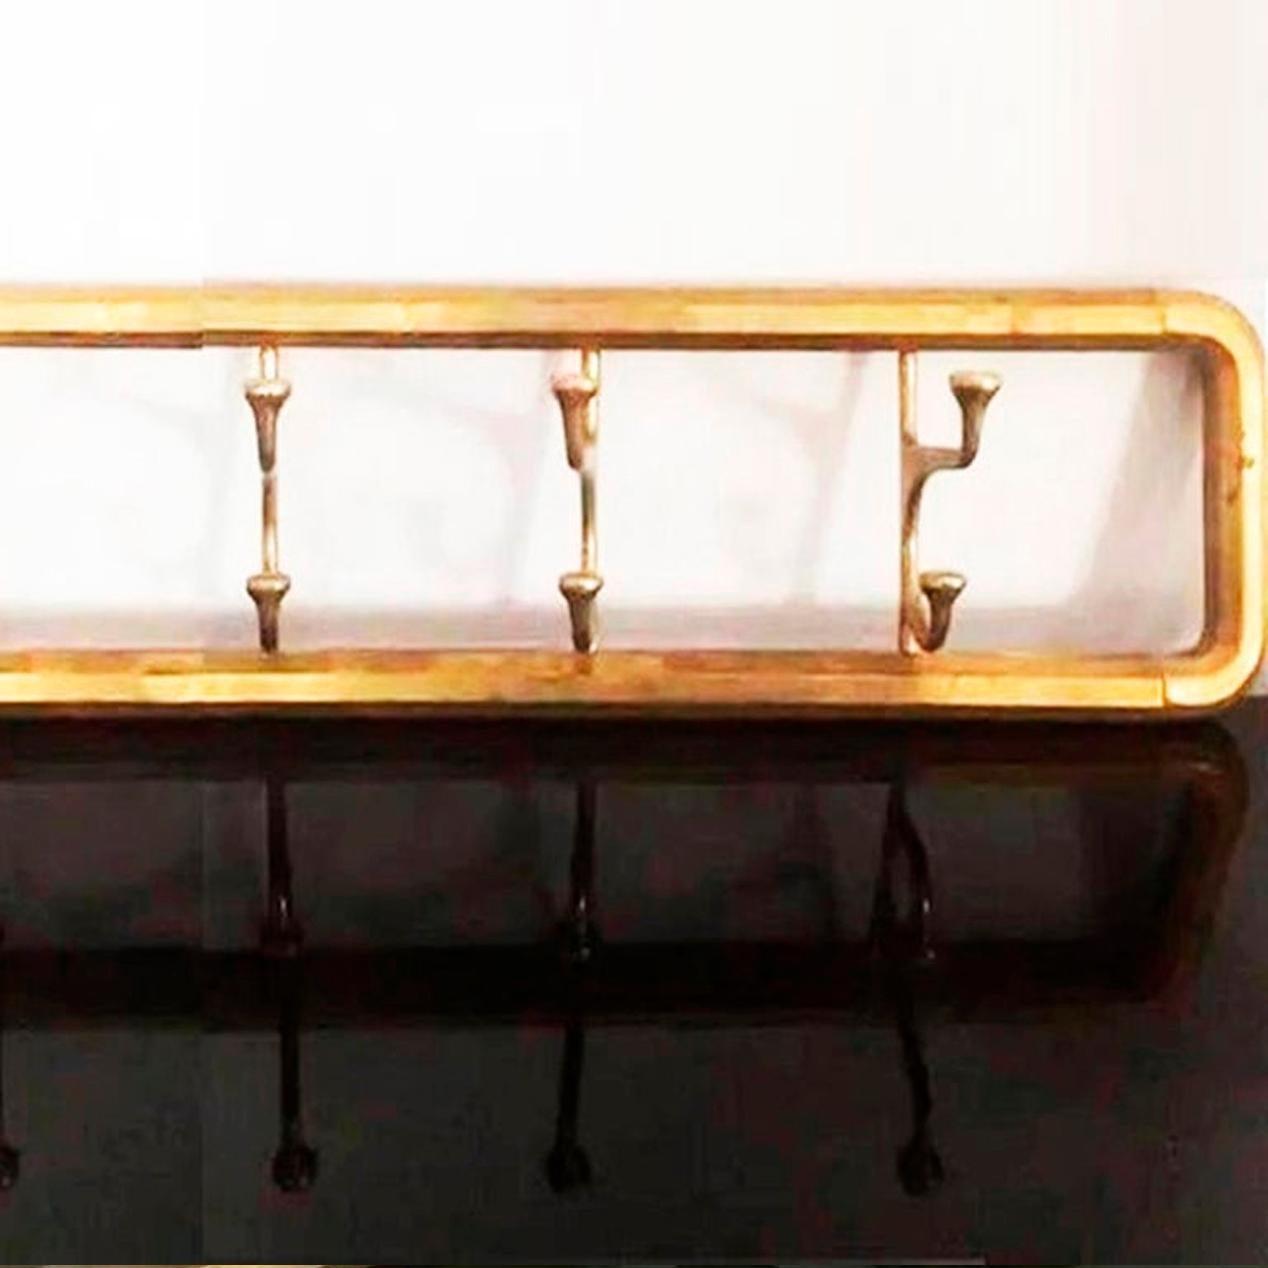 Midcentury / Art Deco foldable wall coat rack in brass or bronze 

Foldable with four hangers
It is a solid piece of brass or gilt bronze, not a sheet metal. Excellent condition.